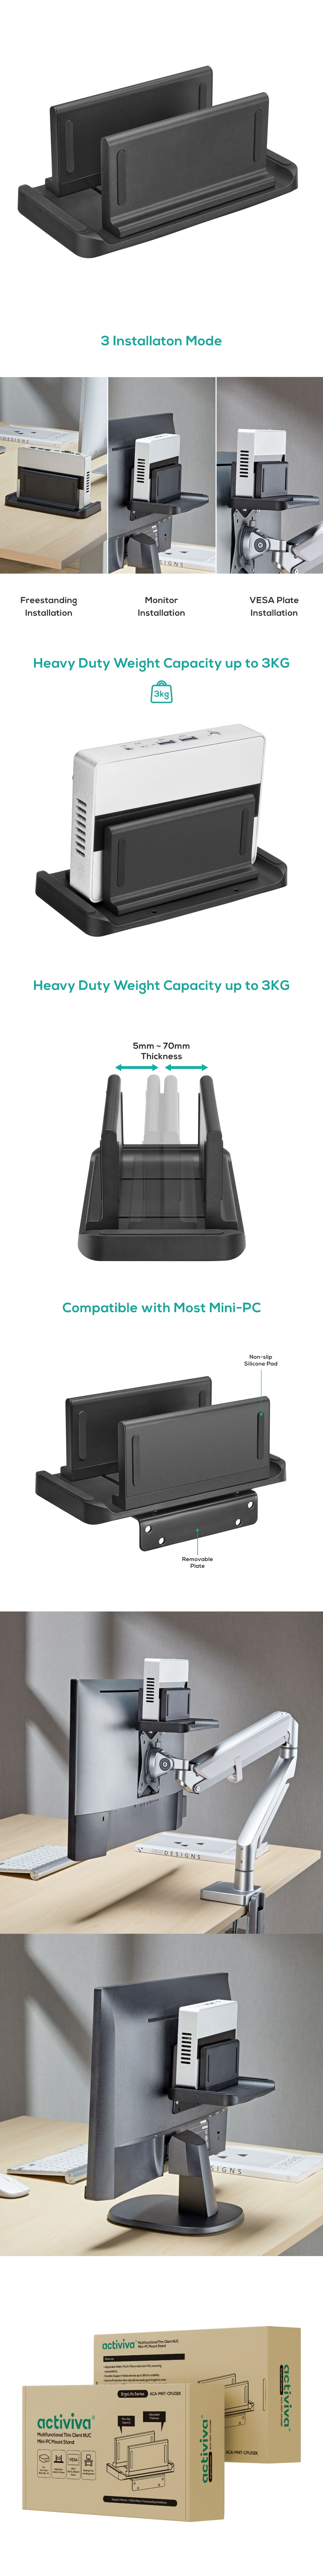 A large marketing image providing additional information about the product mBeat Activiva Thin Client NUC Mini-PC Mount Stand - Additional alt info not provided